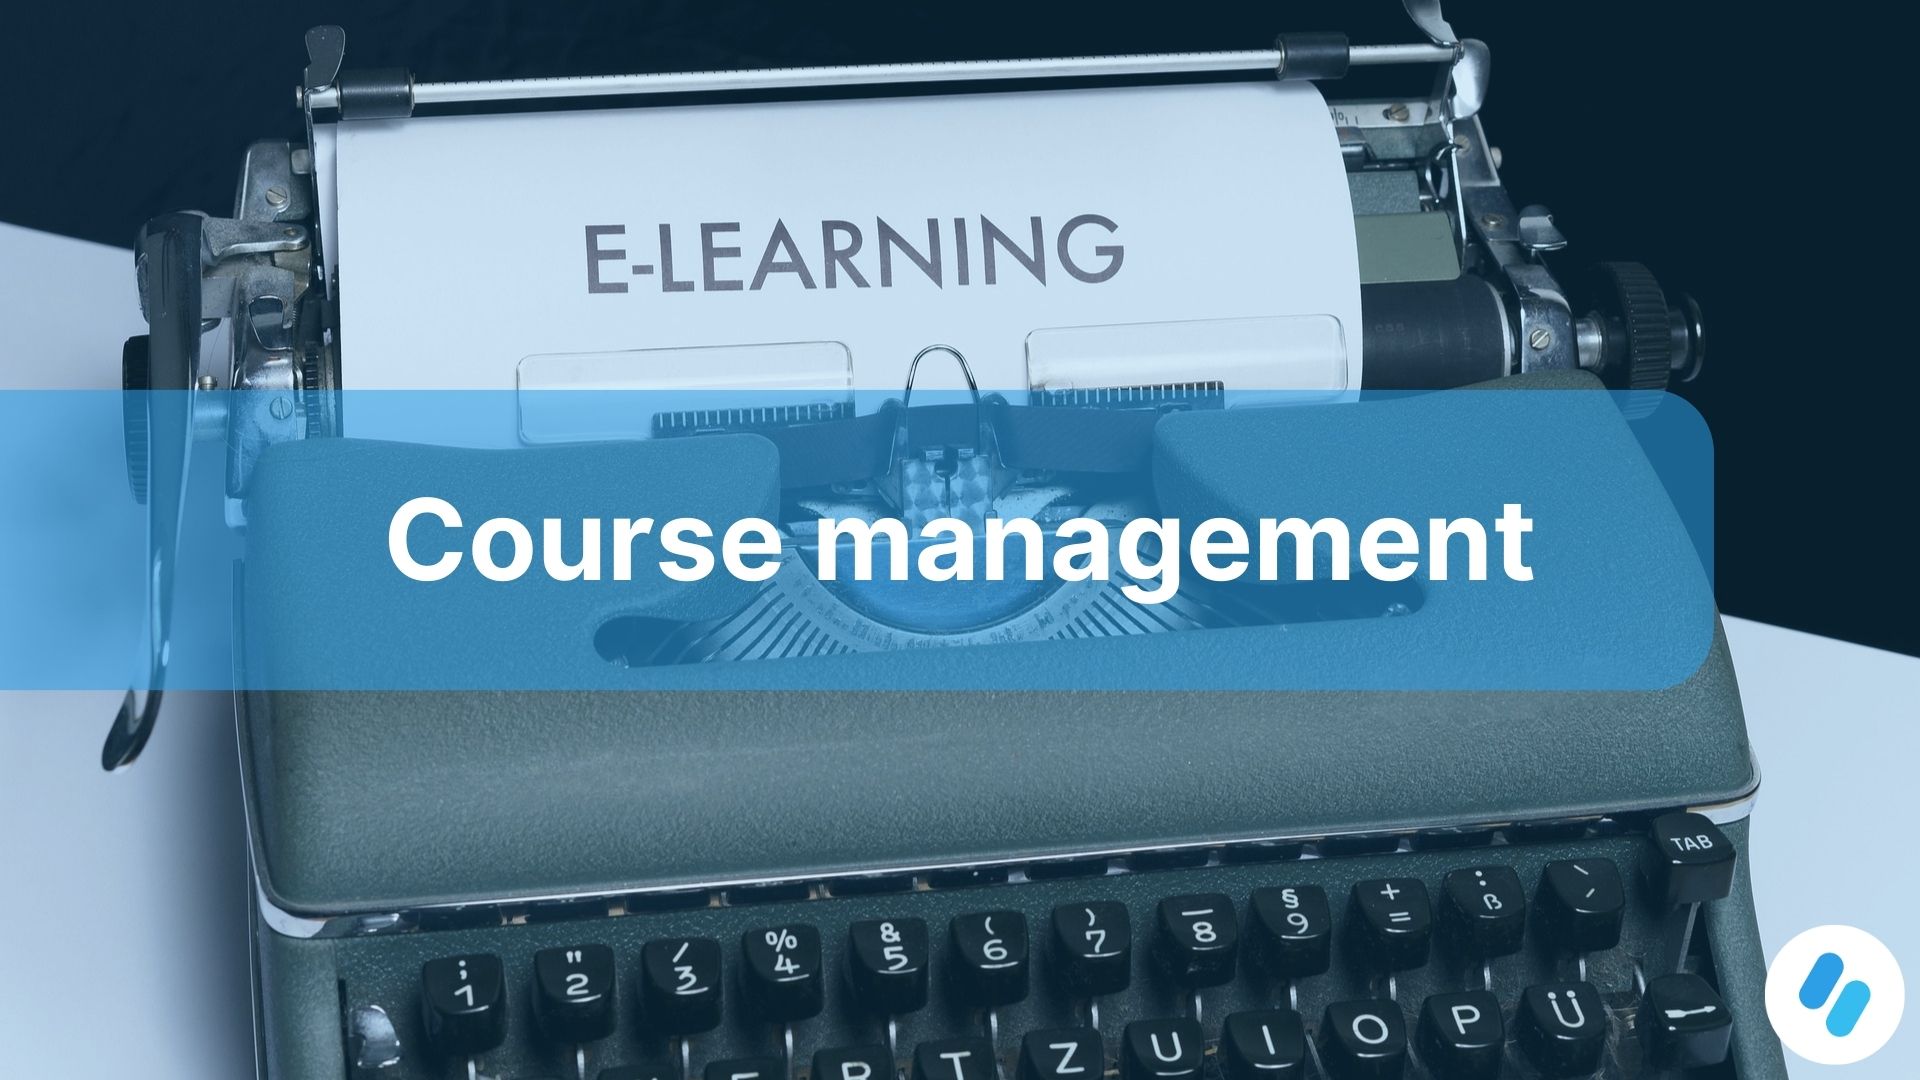 E-Learning in company